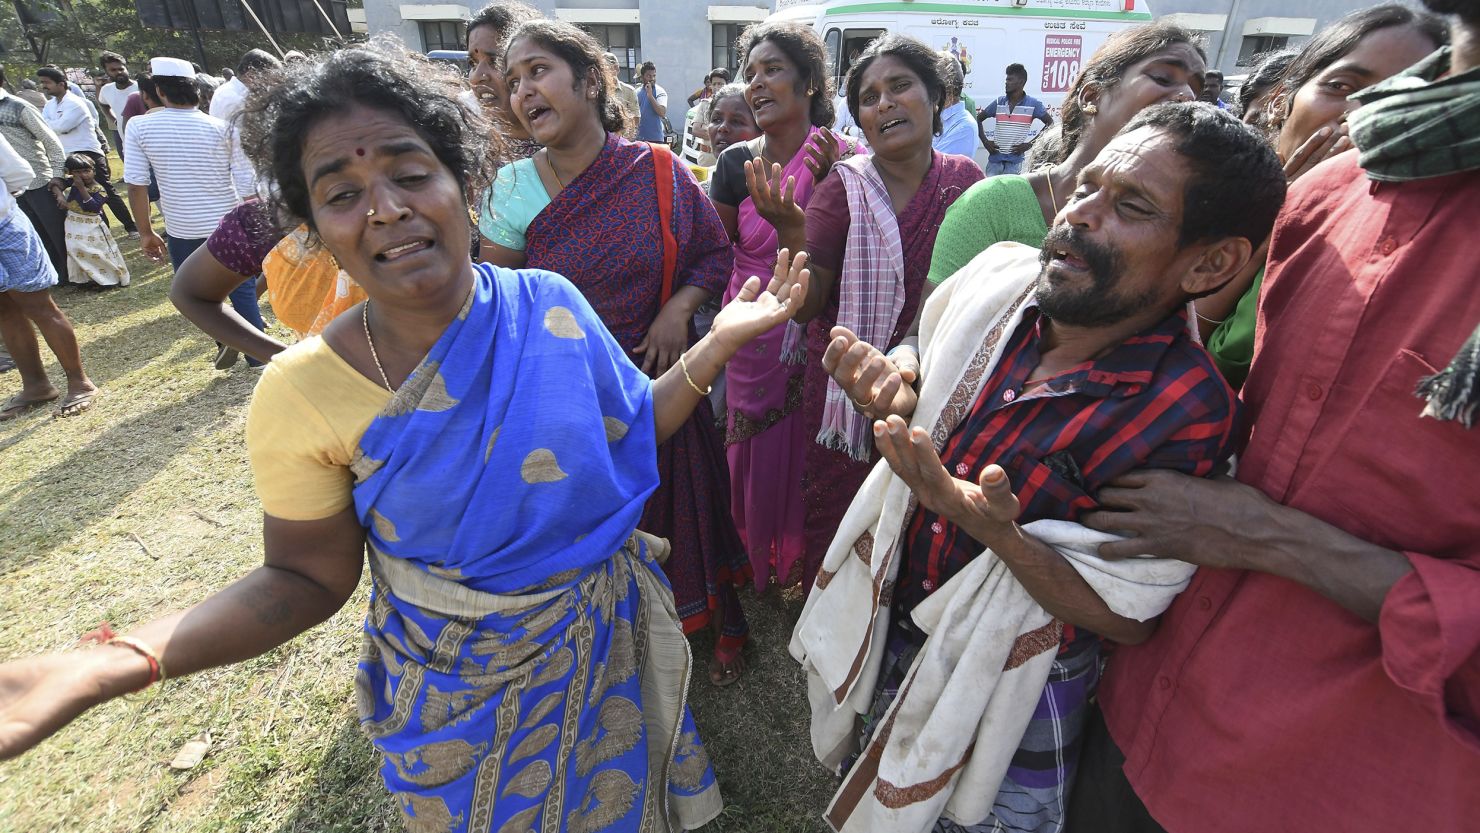 Indians mourn the death of relatives on Saturday in a case of suspected food poisoning in the Chamarajanagar district of Karnataka state, India.